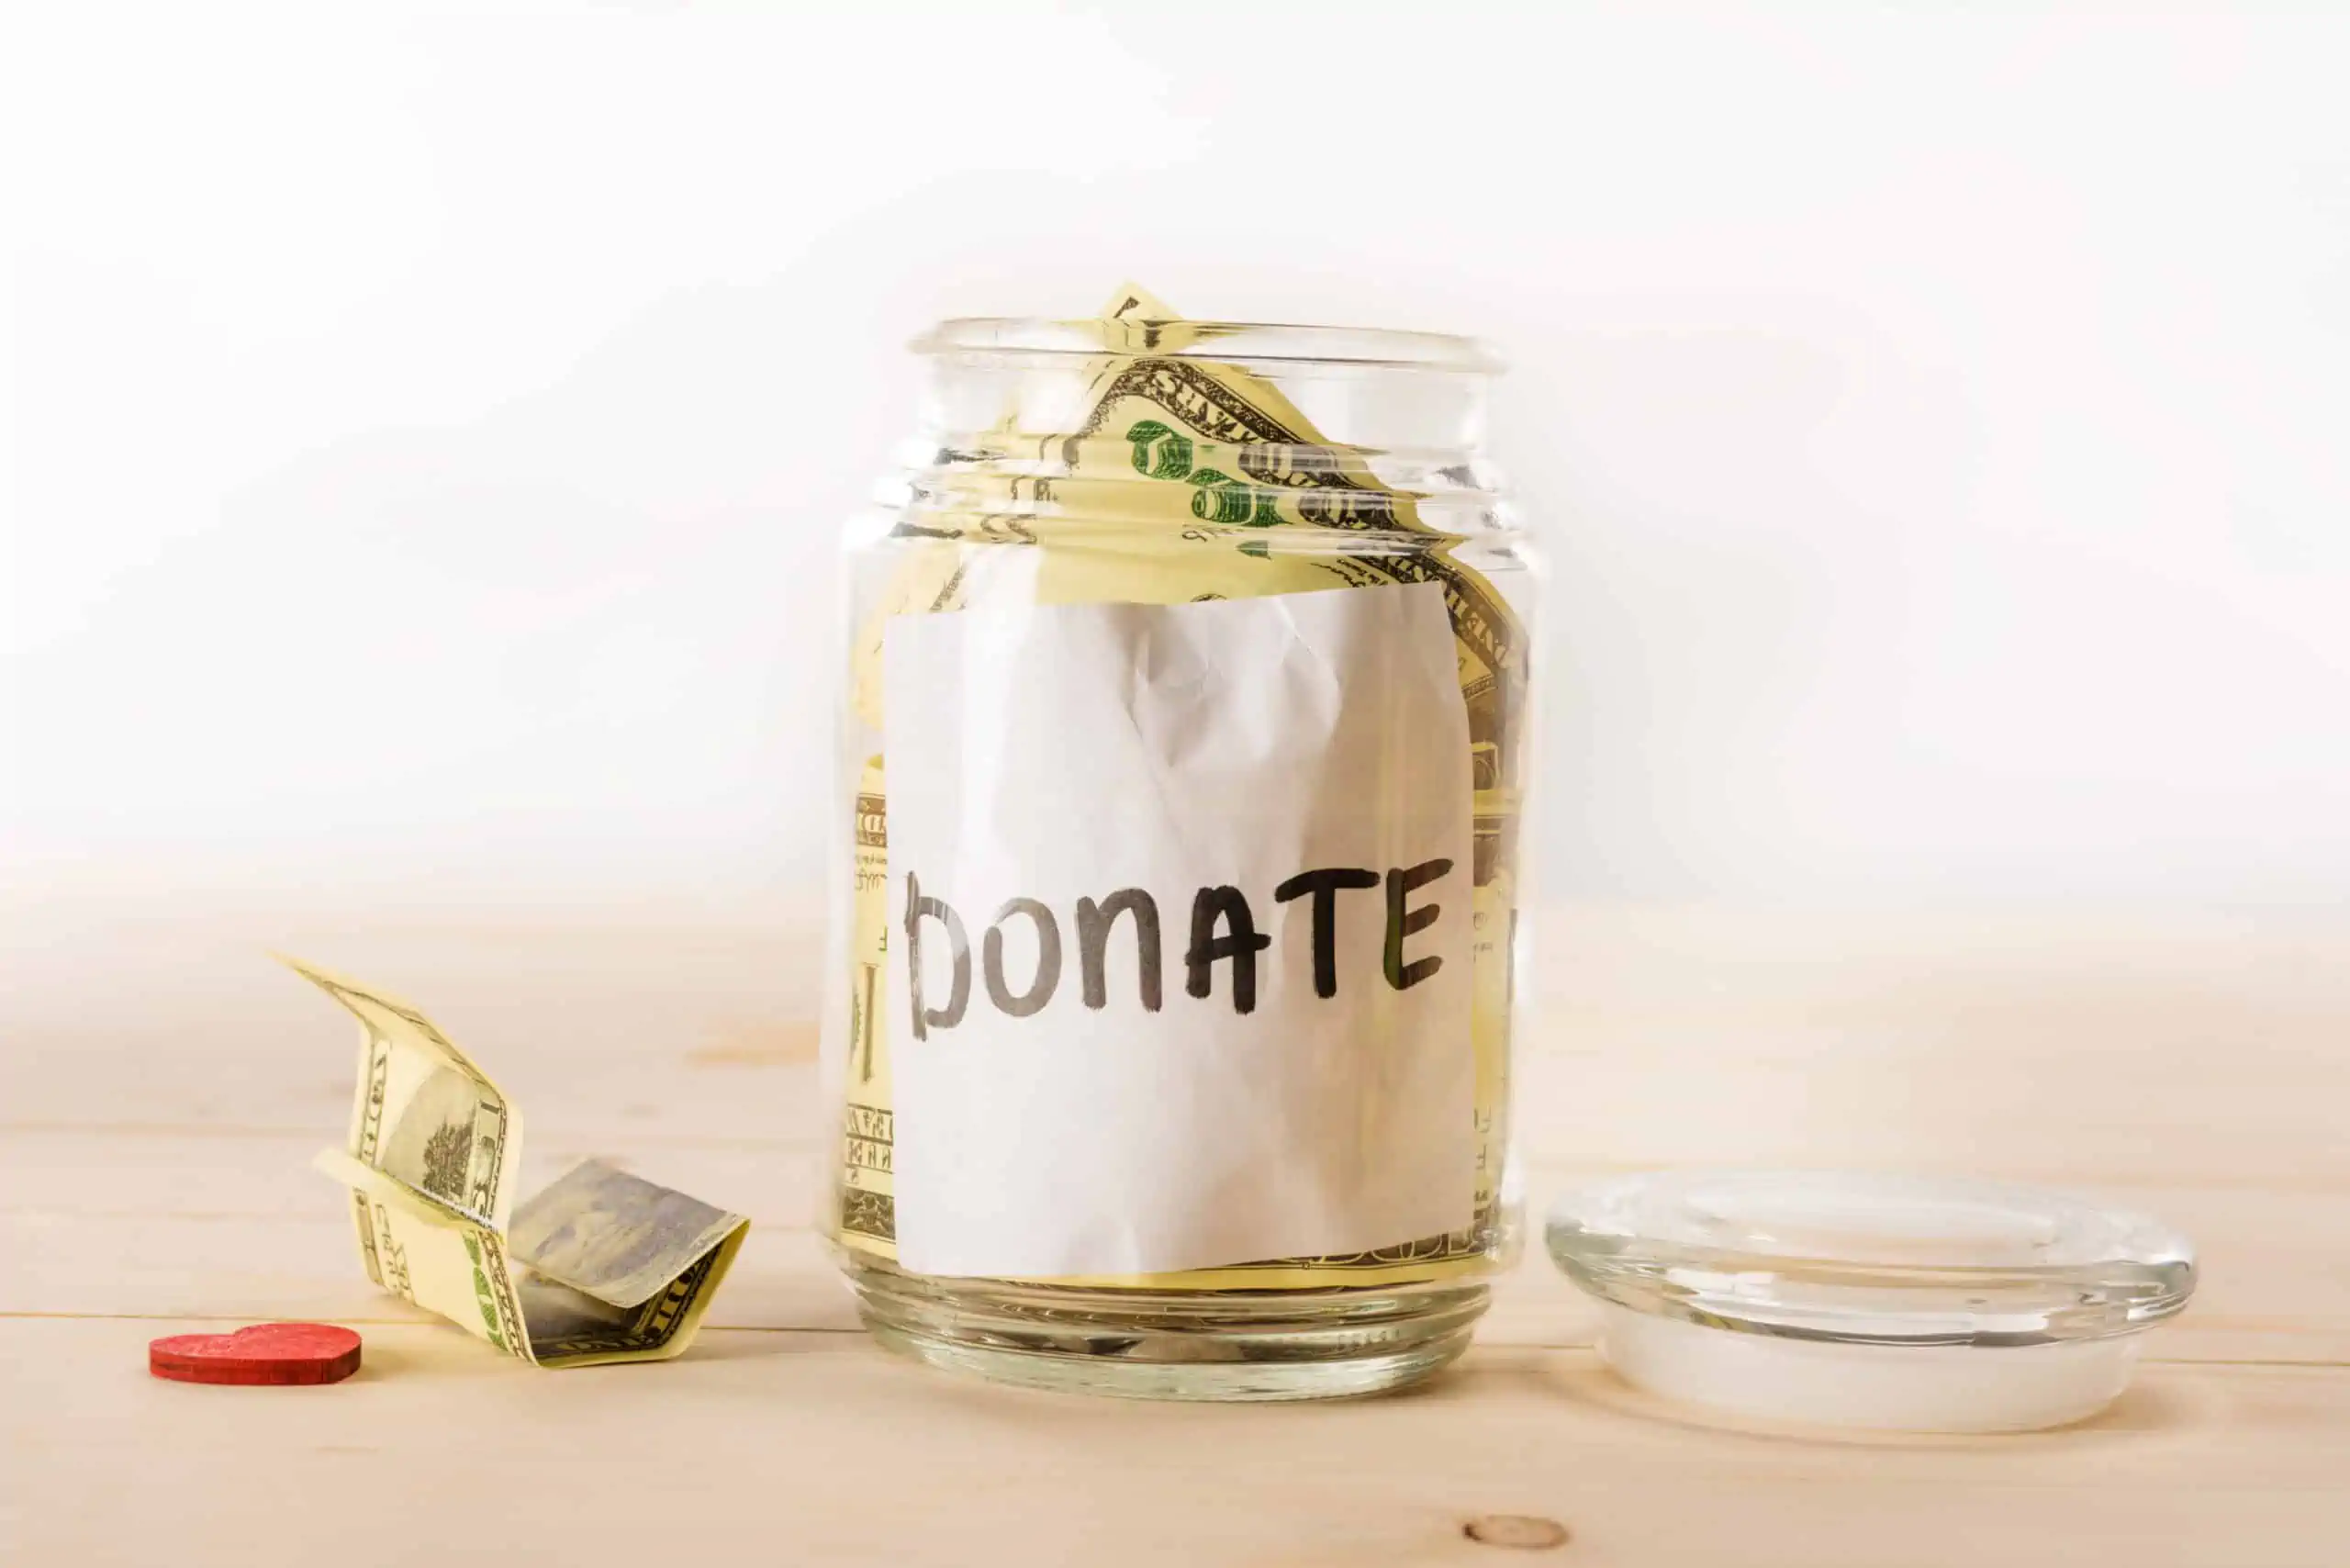 Glass jar with white "Donate" label stuffed with $100 bills to donate to charity